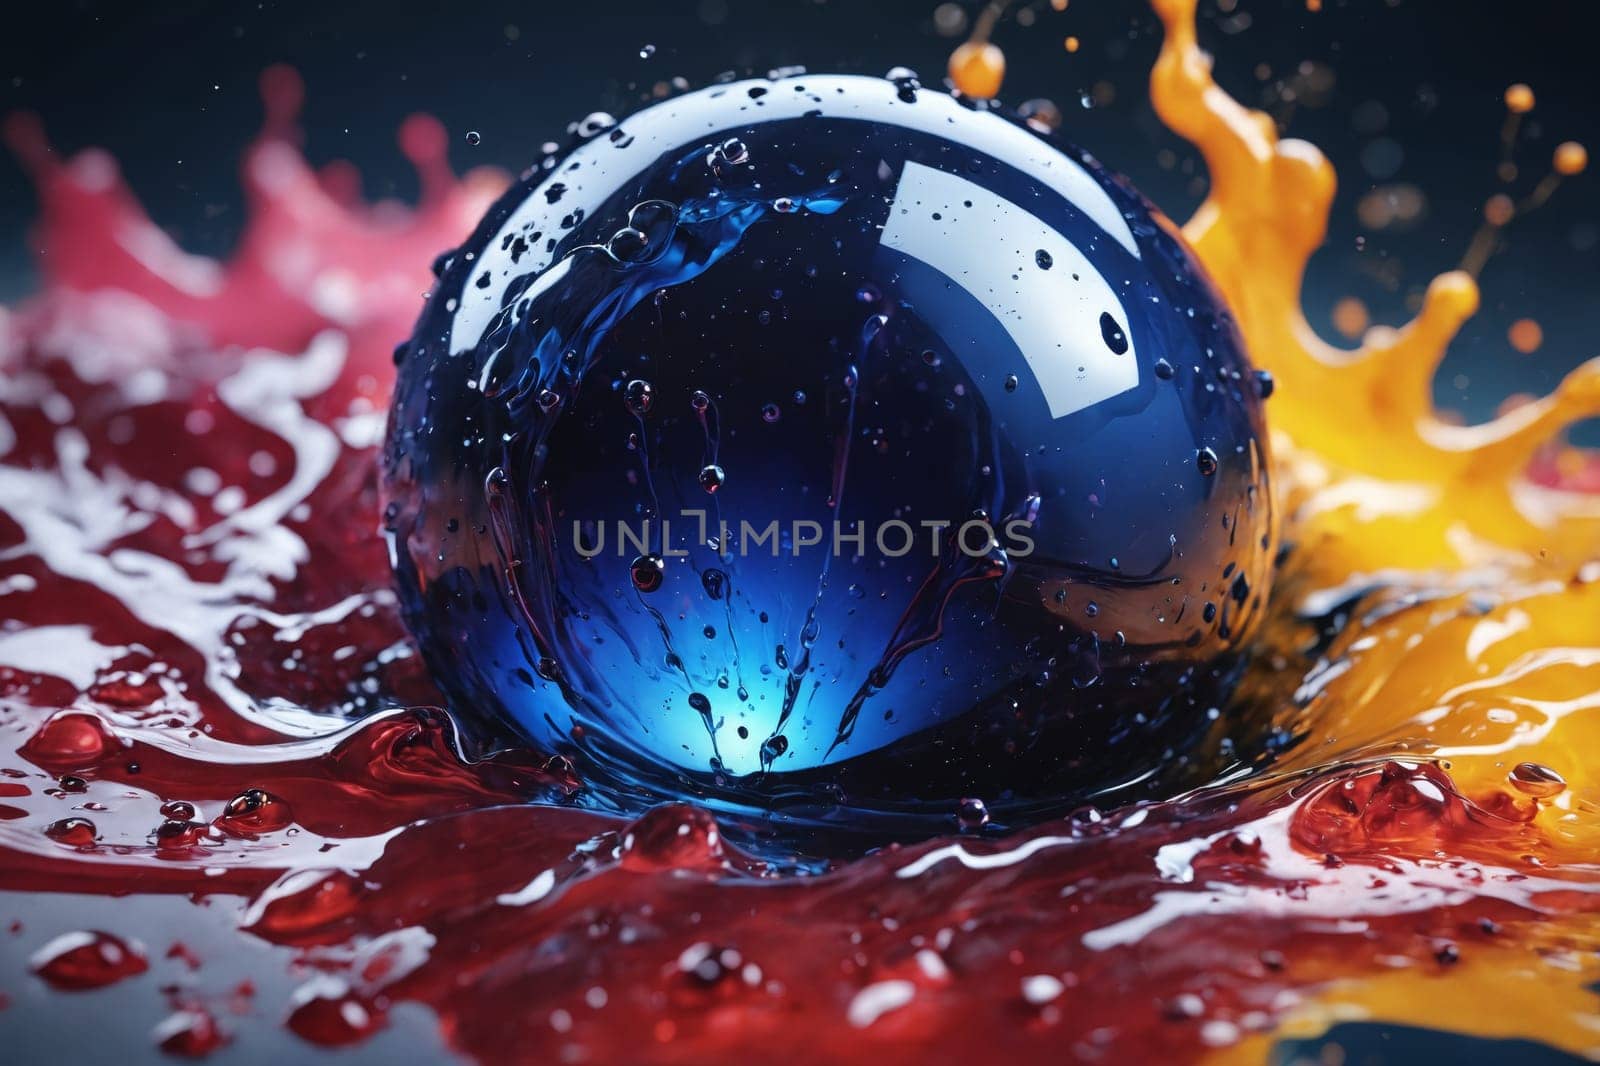 Serene Splash: Blue Ball with Water Droplets in a Colorful Pool by Andre1ns